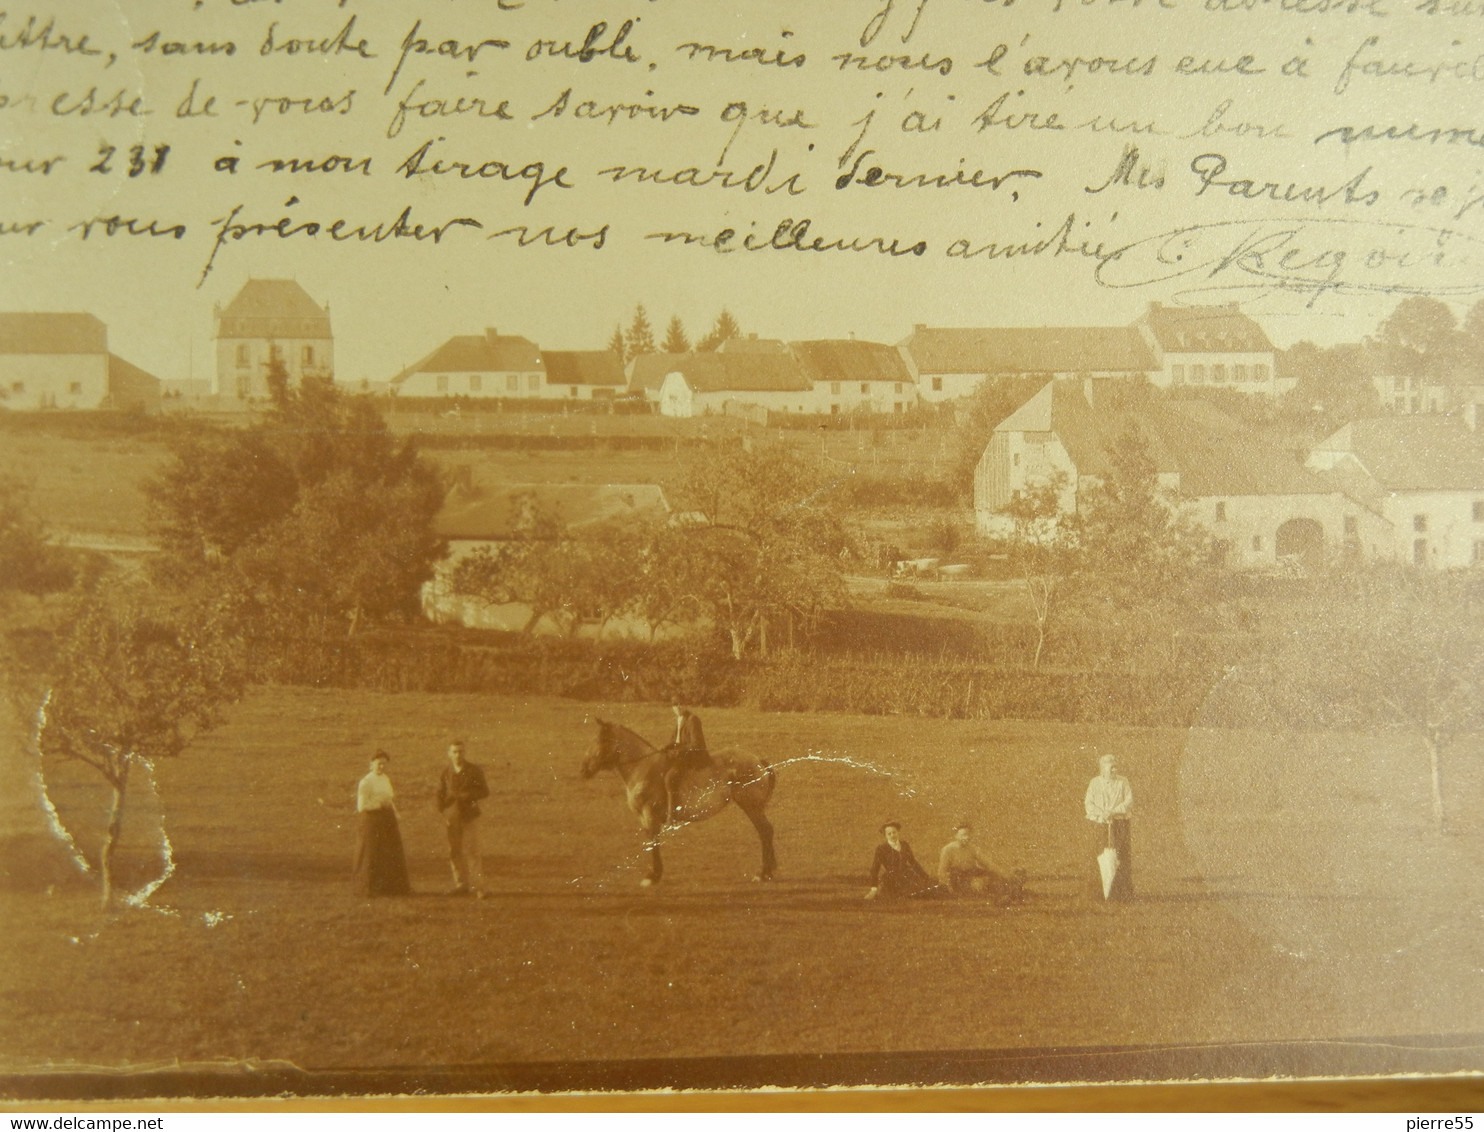 FAUVILLERS - PHOTO PERSO SEPIA- PANORAMA, ANIMEE PERSONNES CHEVAL -OBLITERATION FAUVILLERS 1904 -BE - Fauvillers